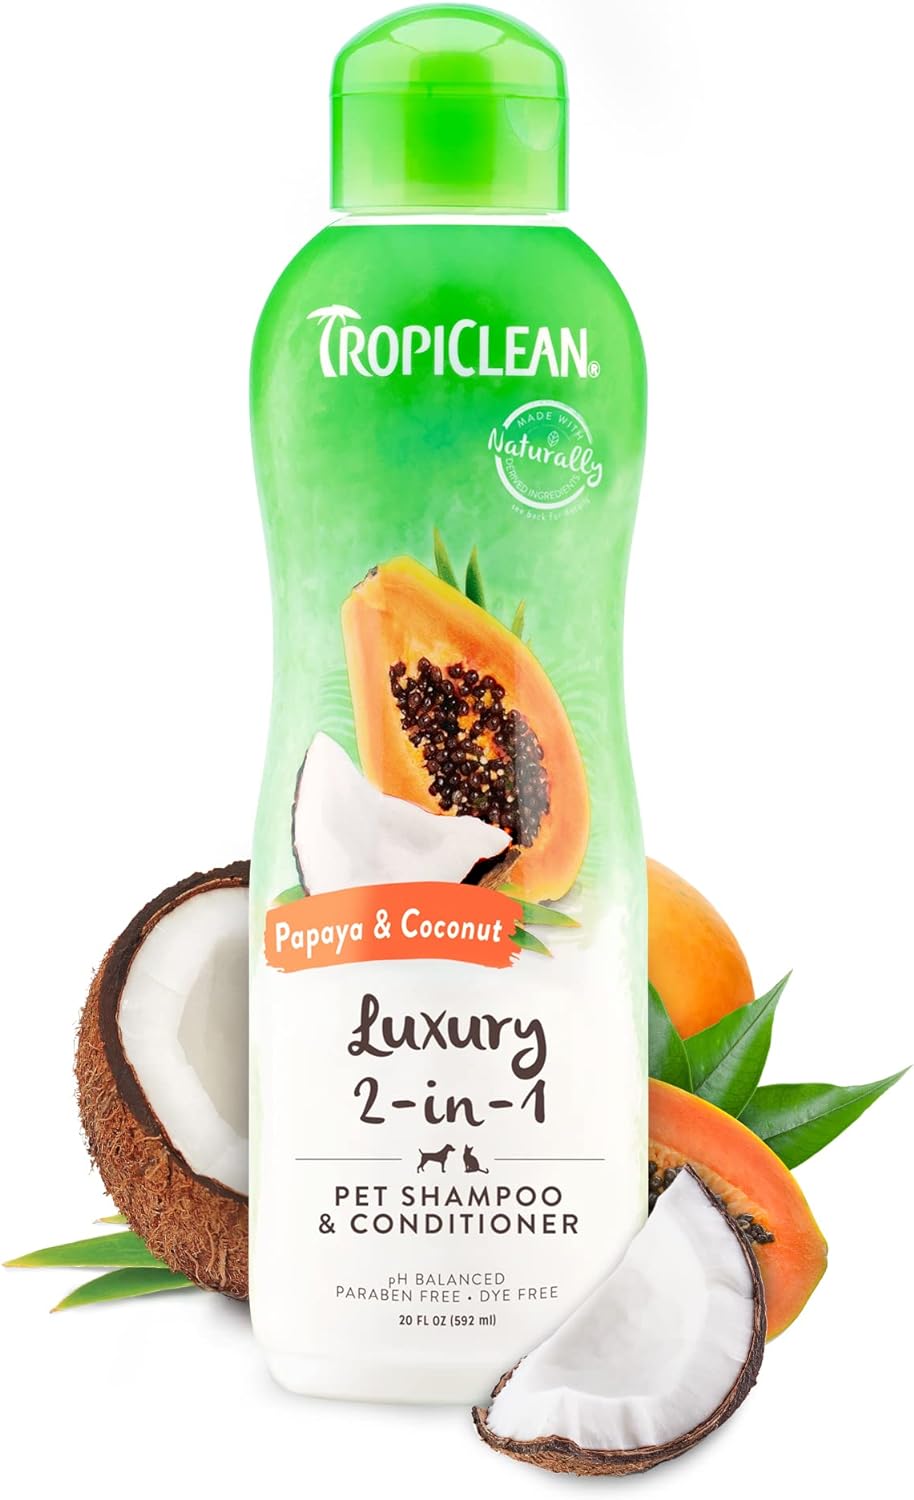 TropiClean Dog Shampoo Grooming Supplies - Luxury 2-in-1 Shampoo & Conditioner - Dog and Cat Shampoo & Conditioner - Derived from Natural Ingredients - Used by Groomers - Papaya & Coconut, 592ml?TRPYSH20Z